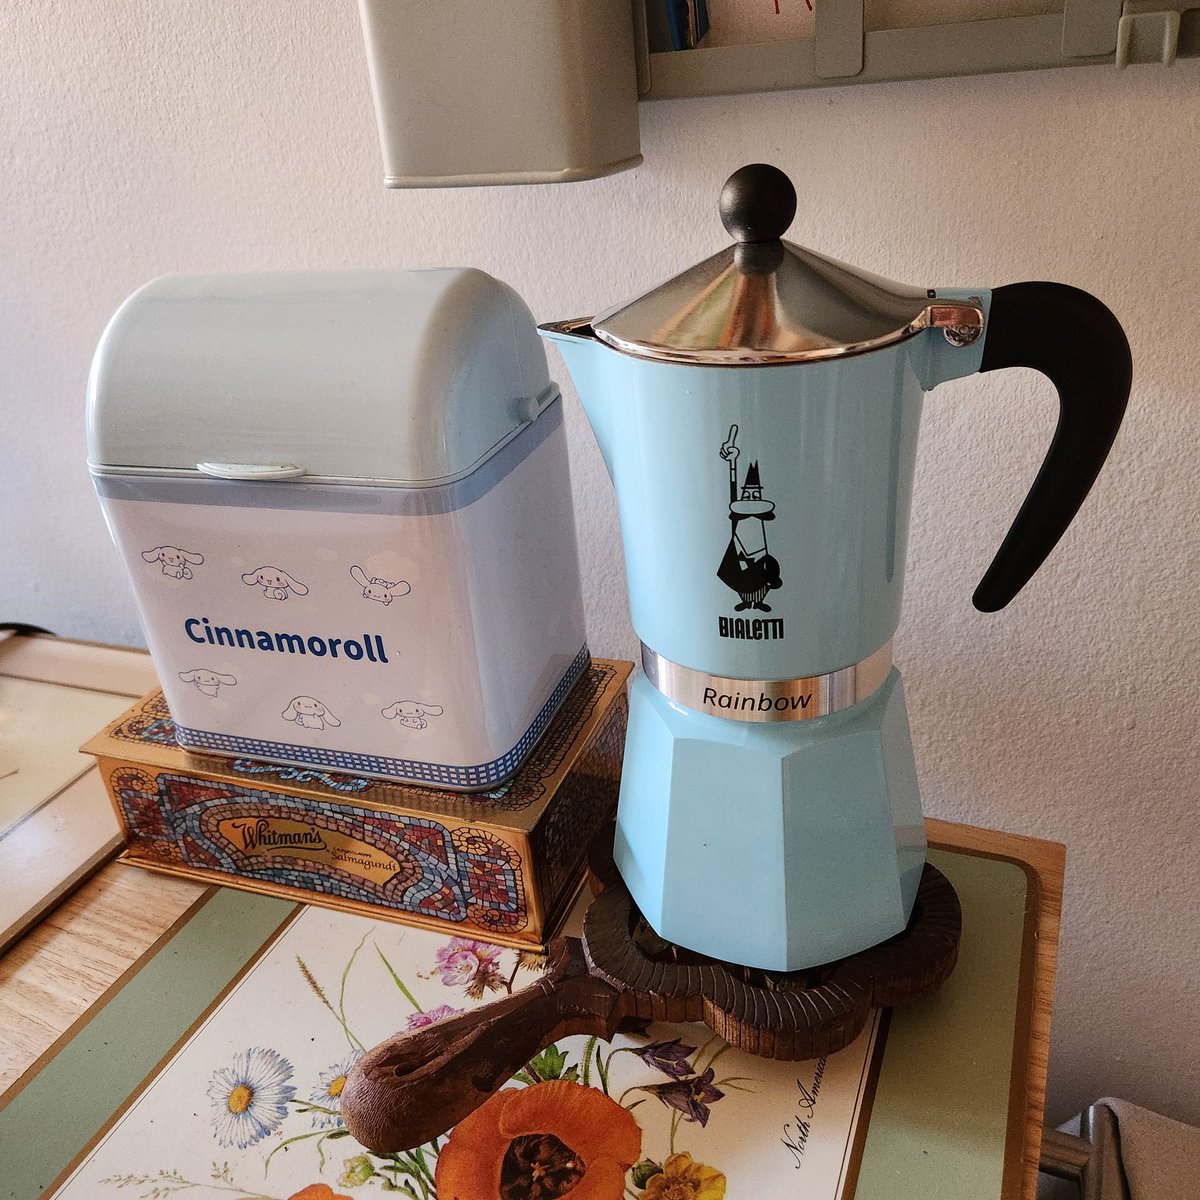 my second cheap drip coffee maker since moving out broke and instead of buying a 3d one i invested in a bialetti moka pot, look how cute